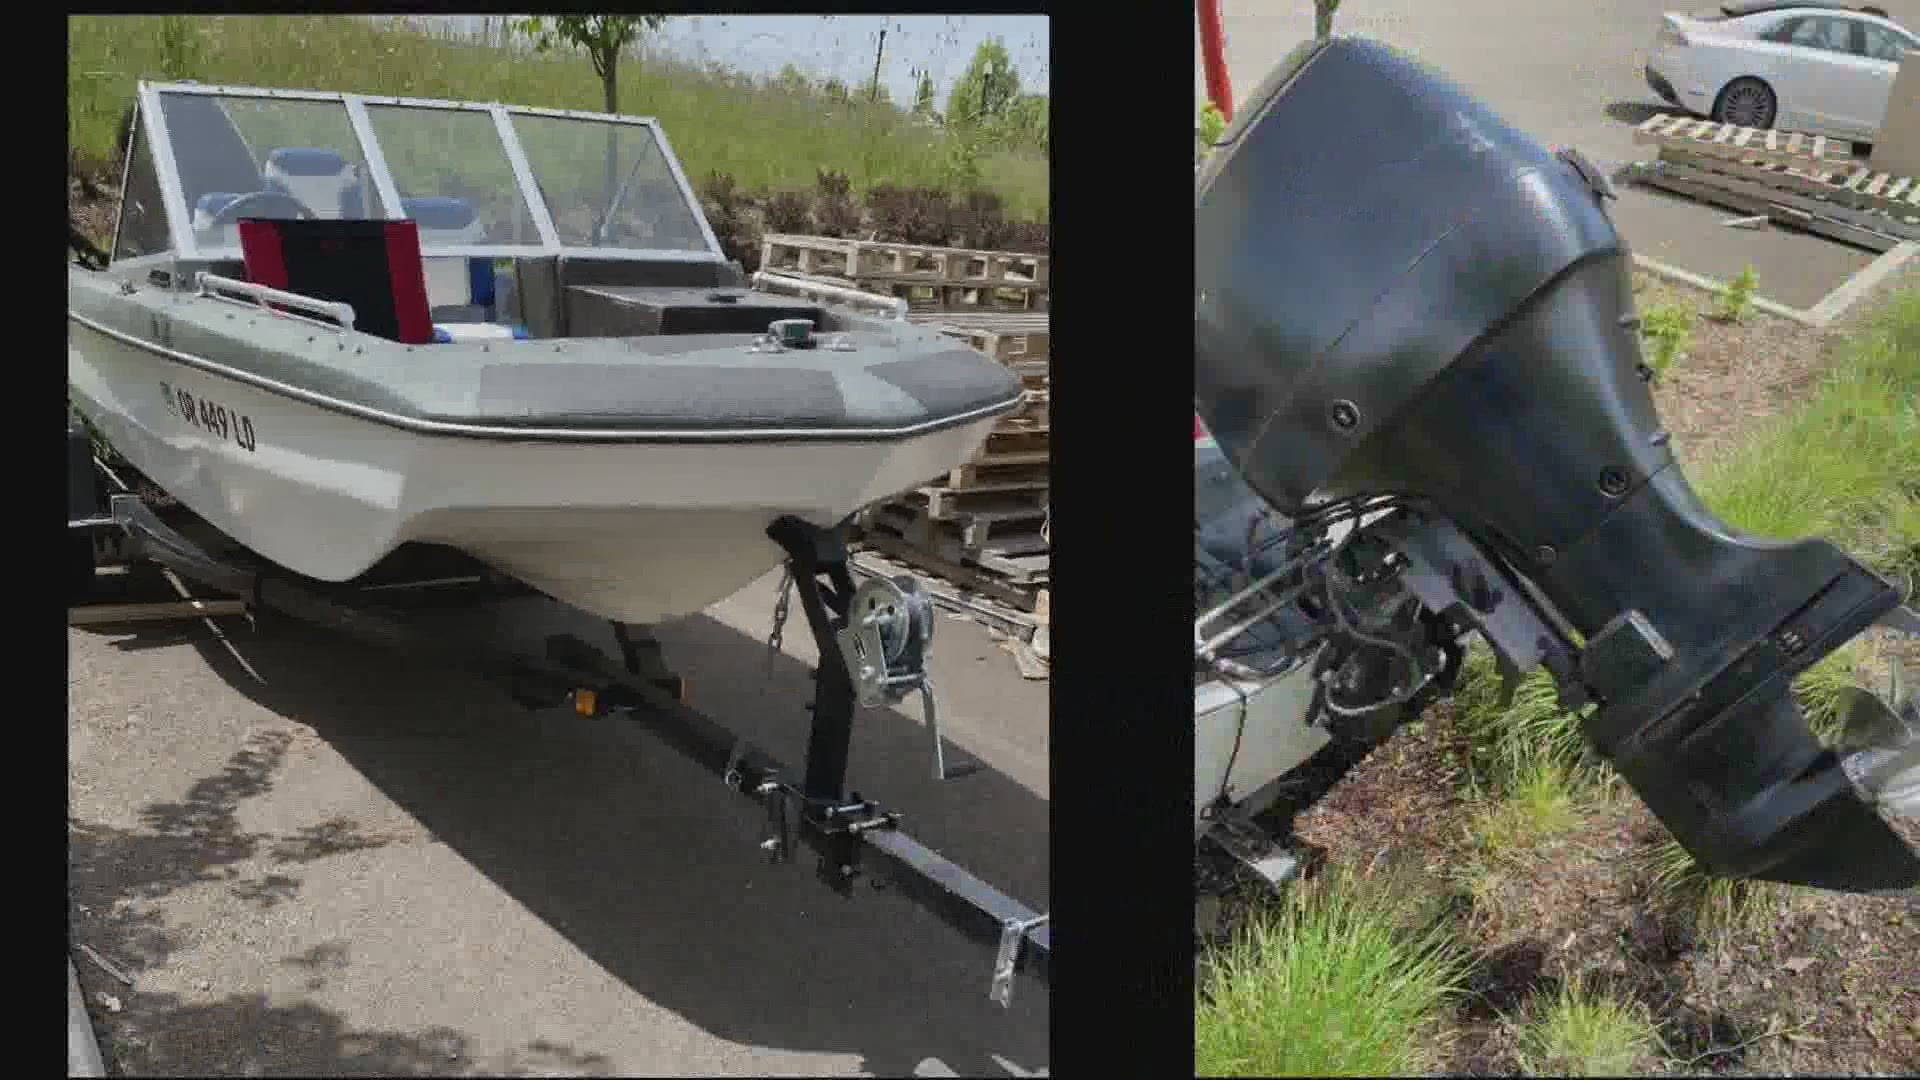 Brian Roberson wants his stolen boat back, not for the monetary loss but for the sentimental one.